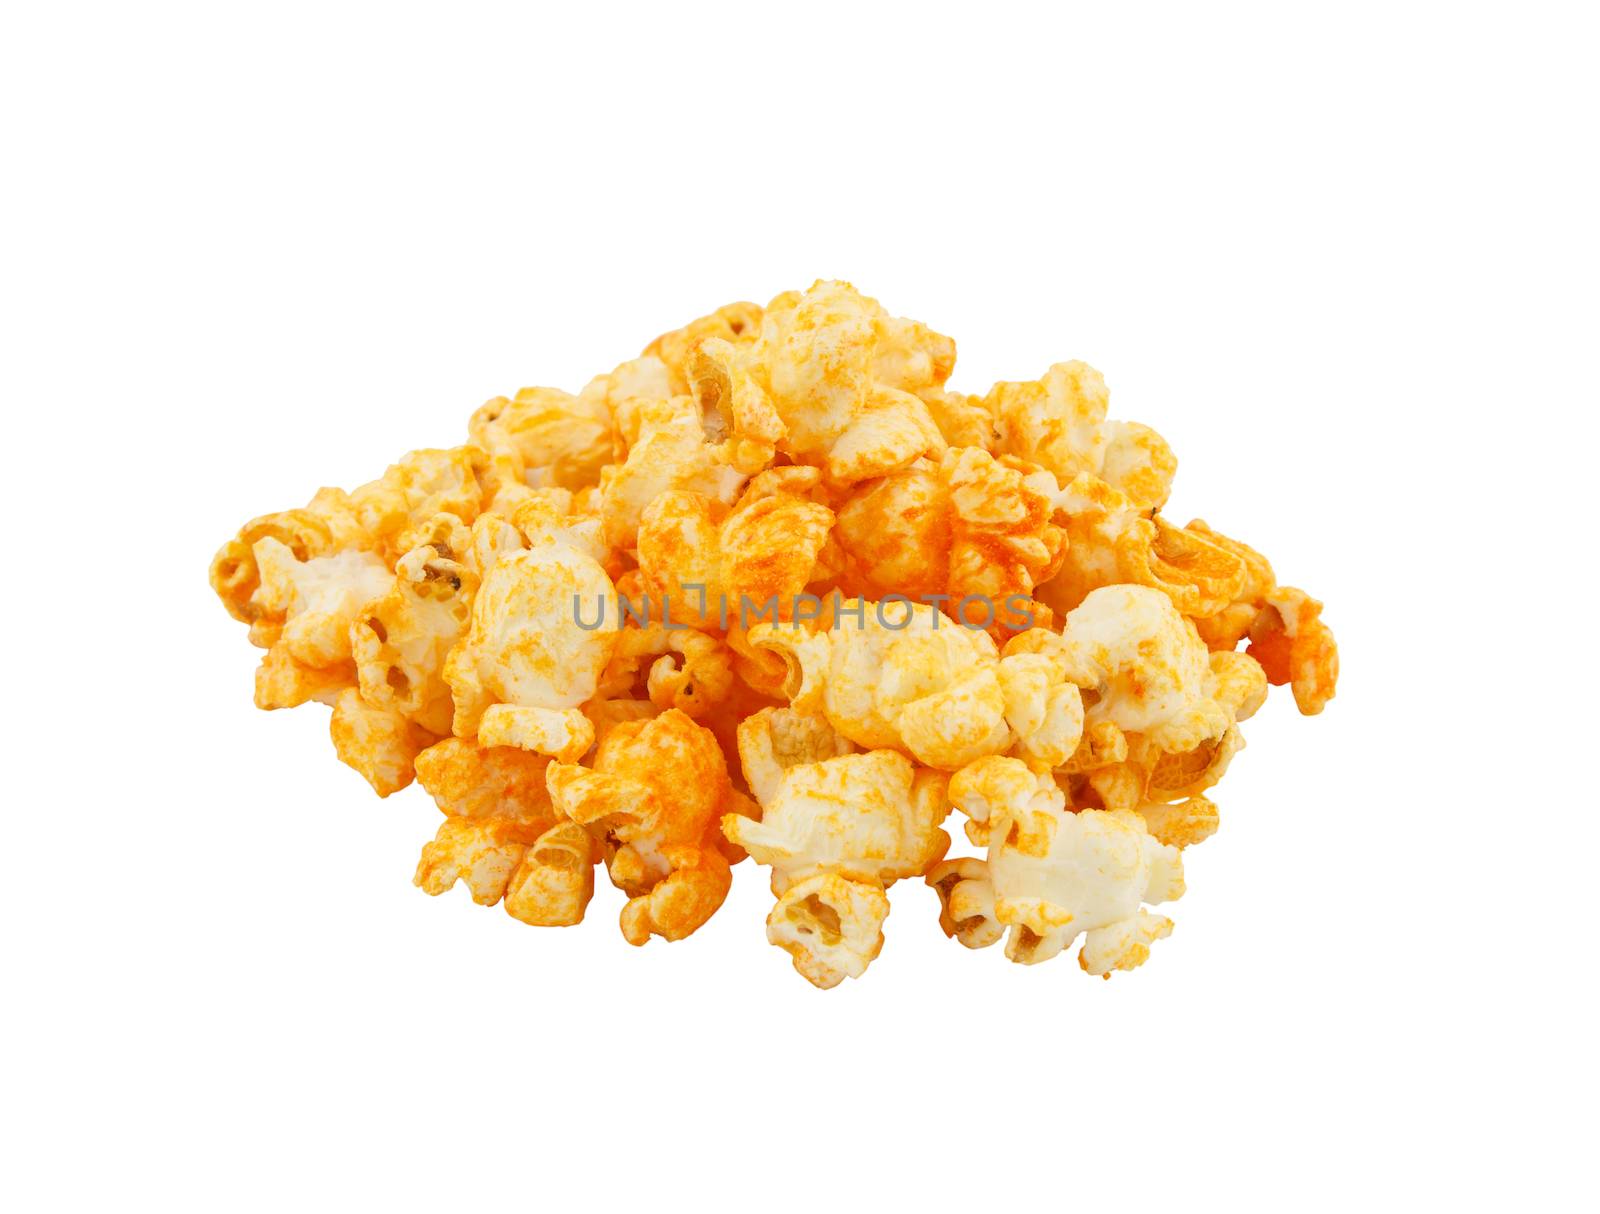 Cheese popcorn on white background by vitawin